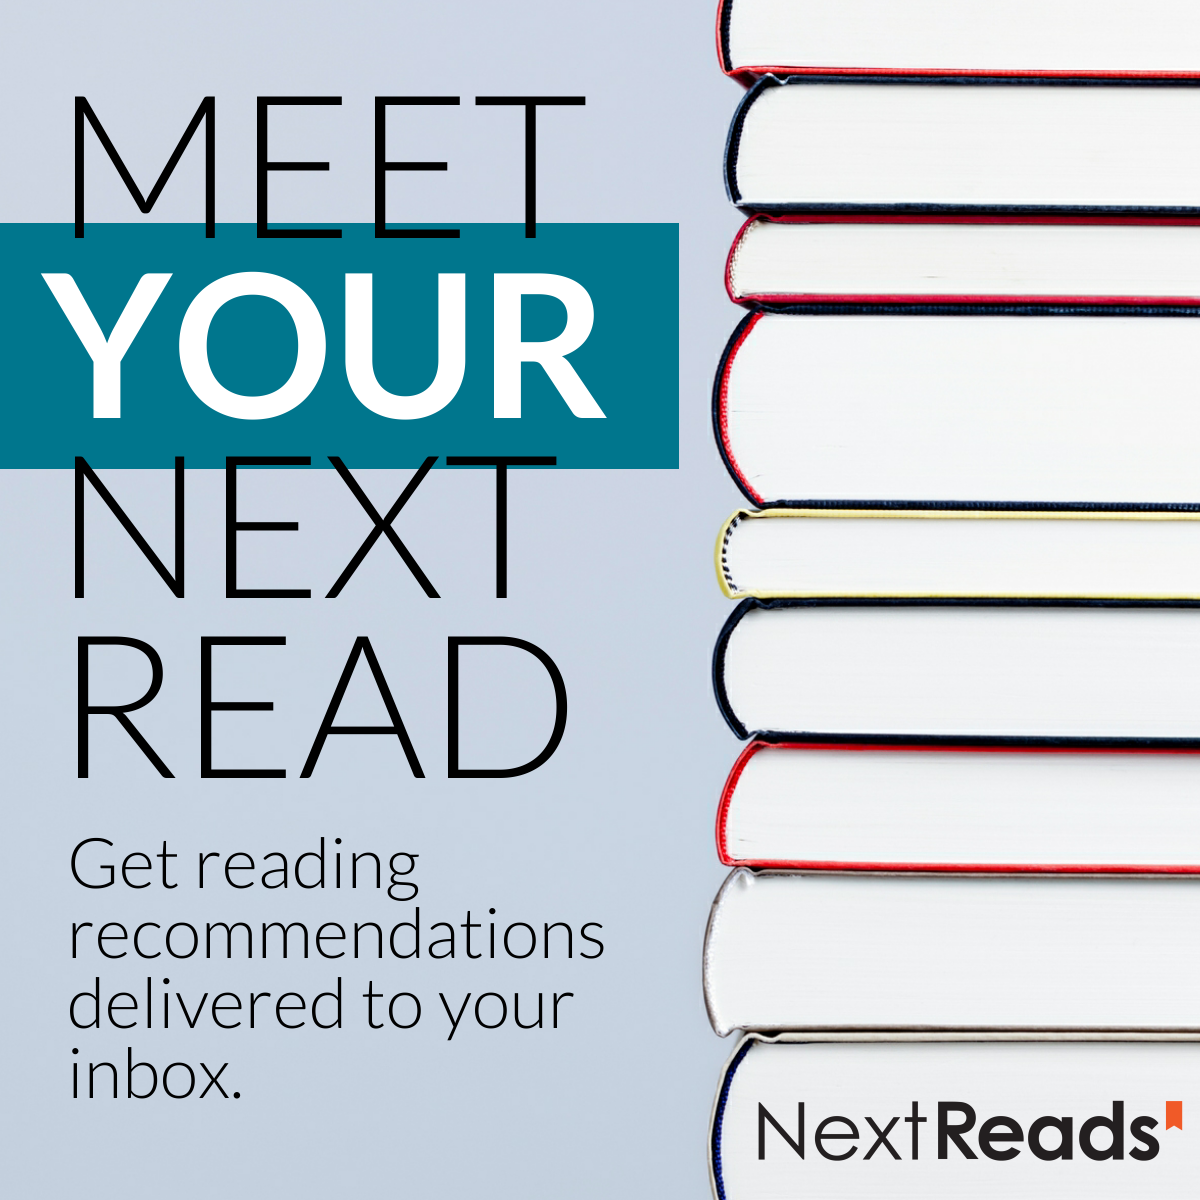 Meet Your Next Read. Get reading recommendations delivered to your inbox